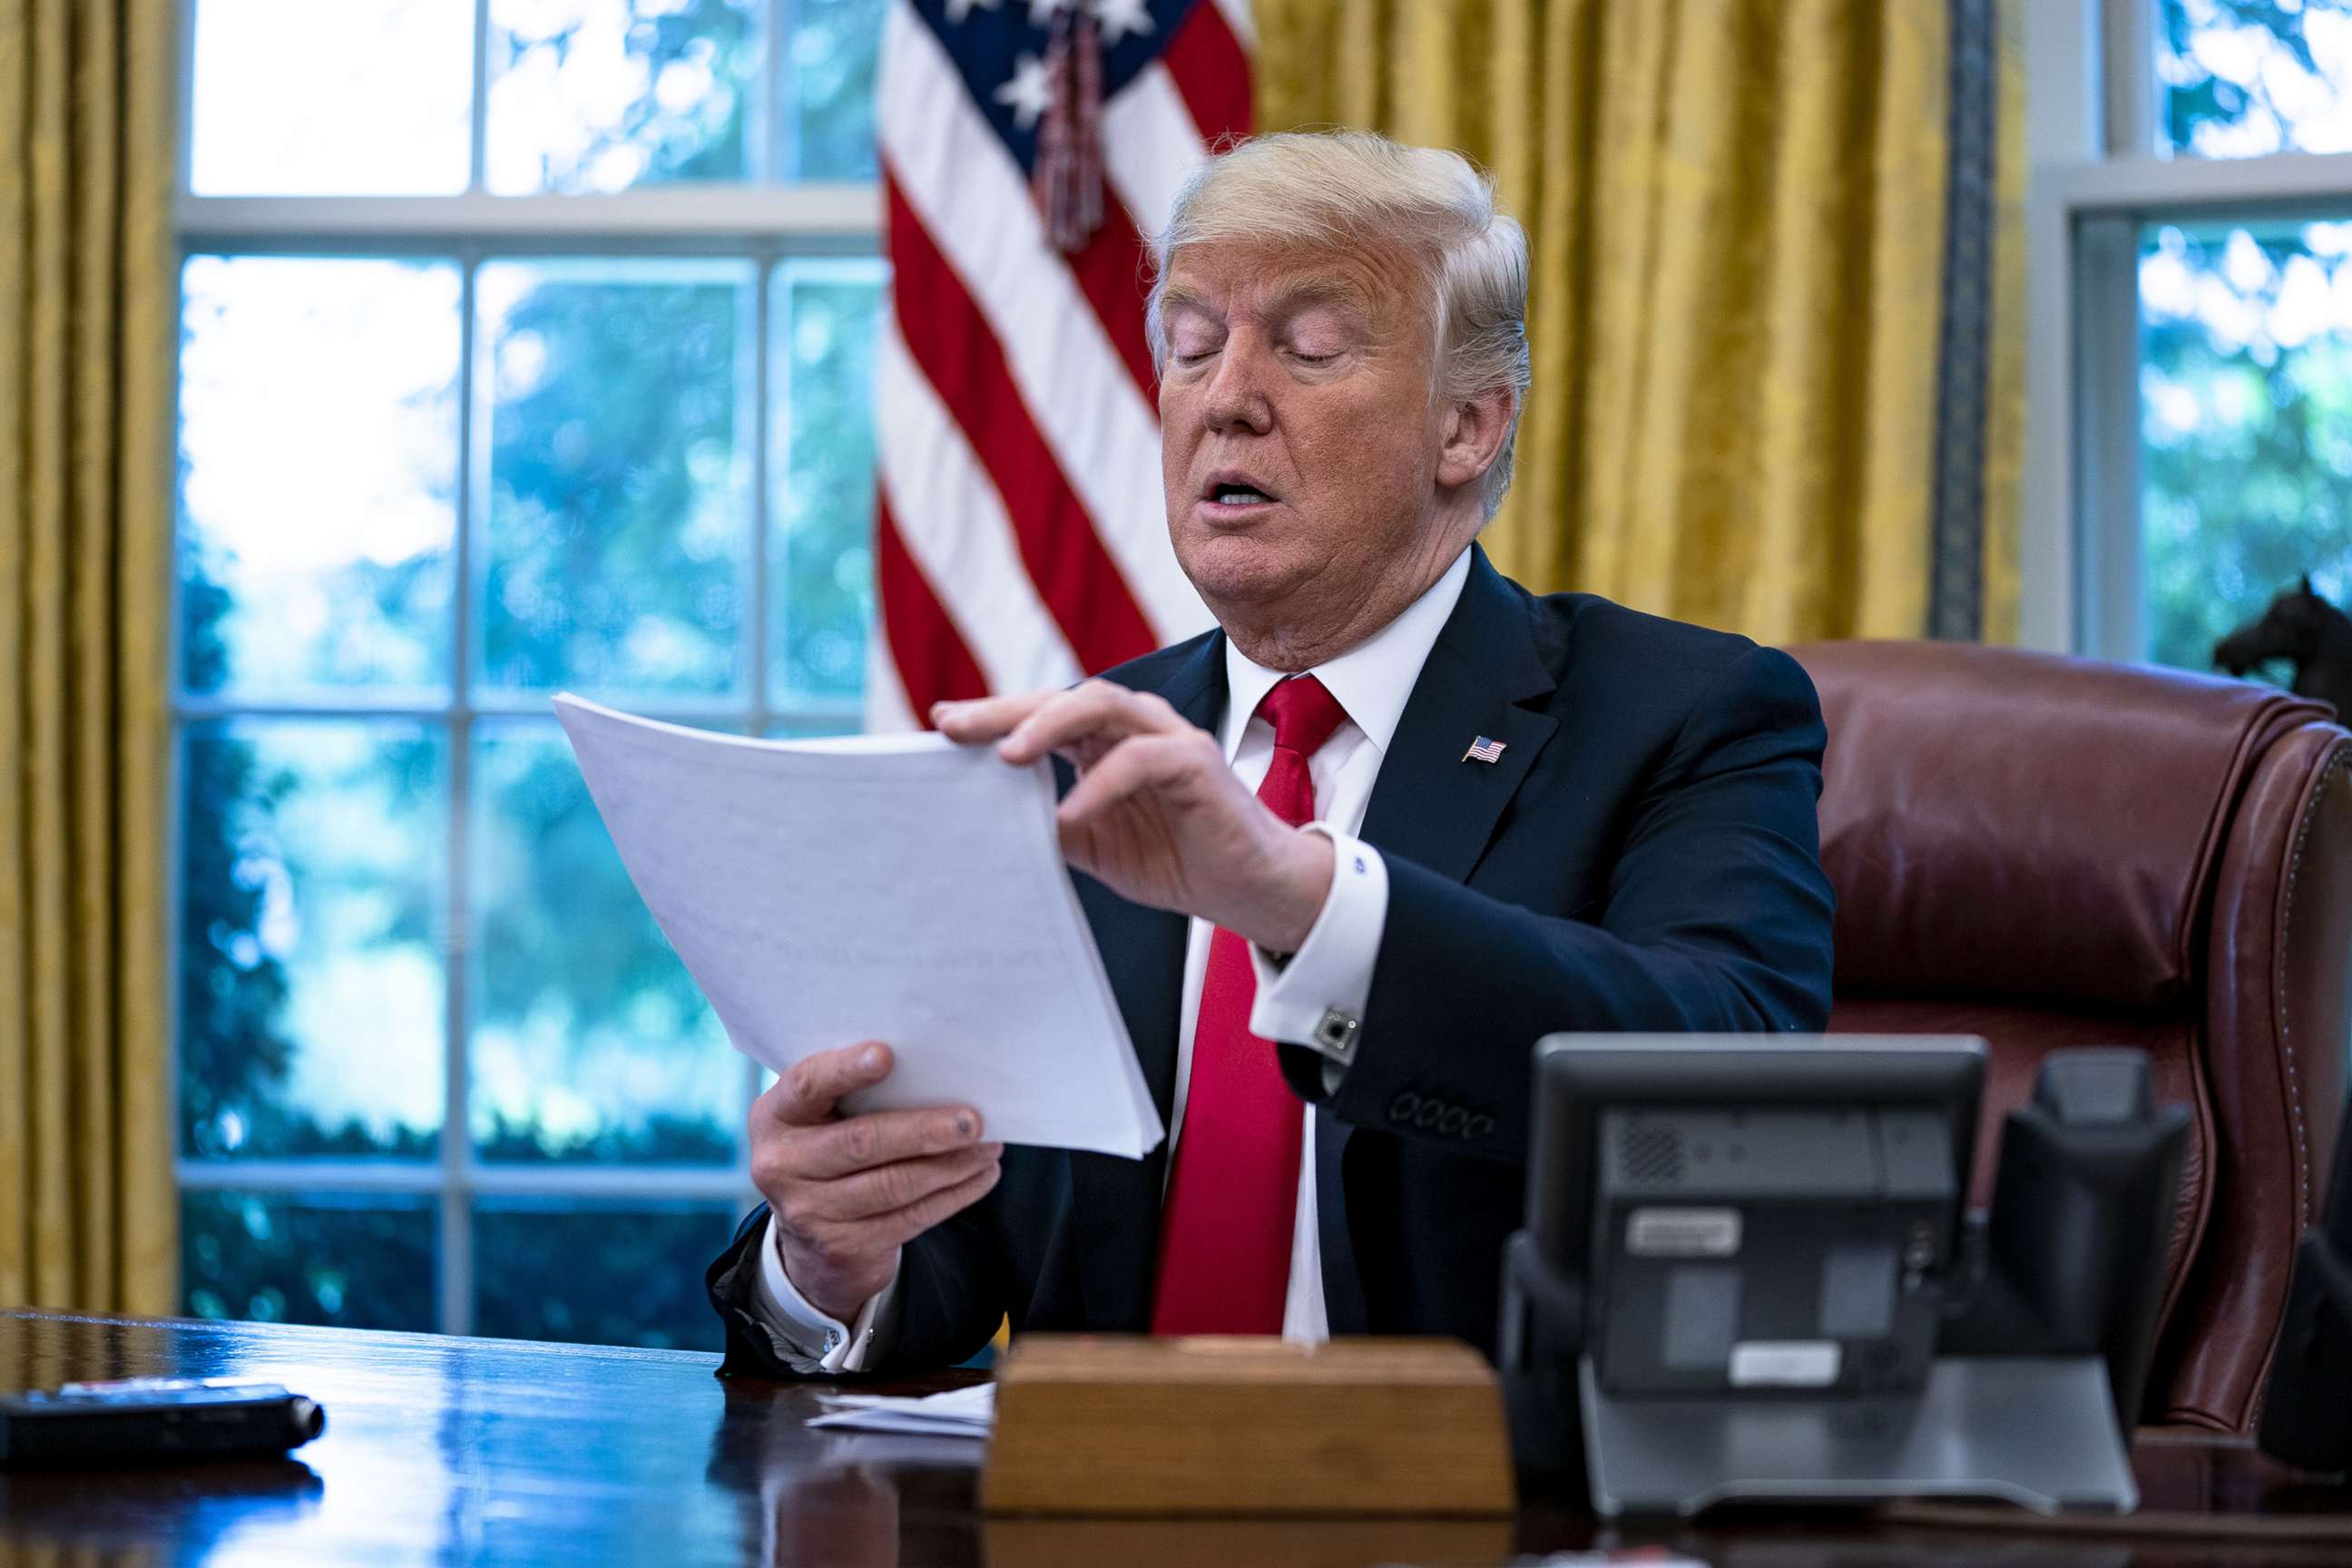 PHOTO: In this Aug. 30, 2018, file photo, President Donald Trump reviews papers during an interview in the Oval Office of the White House in Washington, D.C.